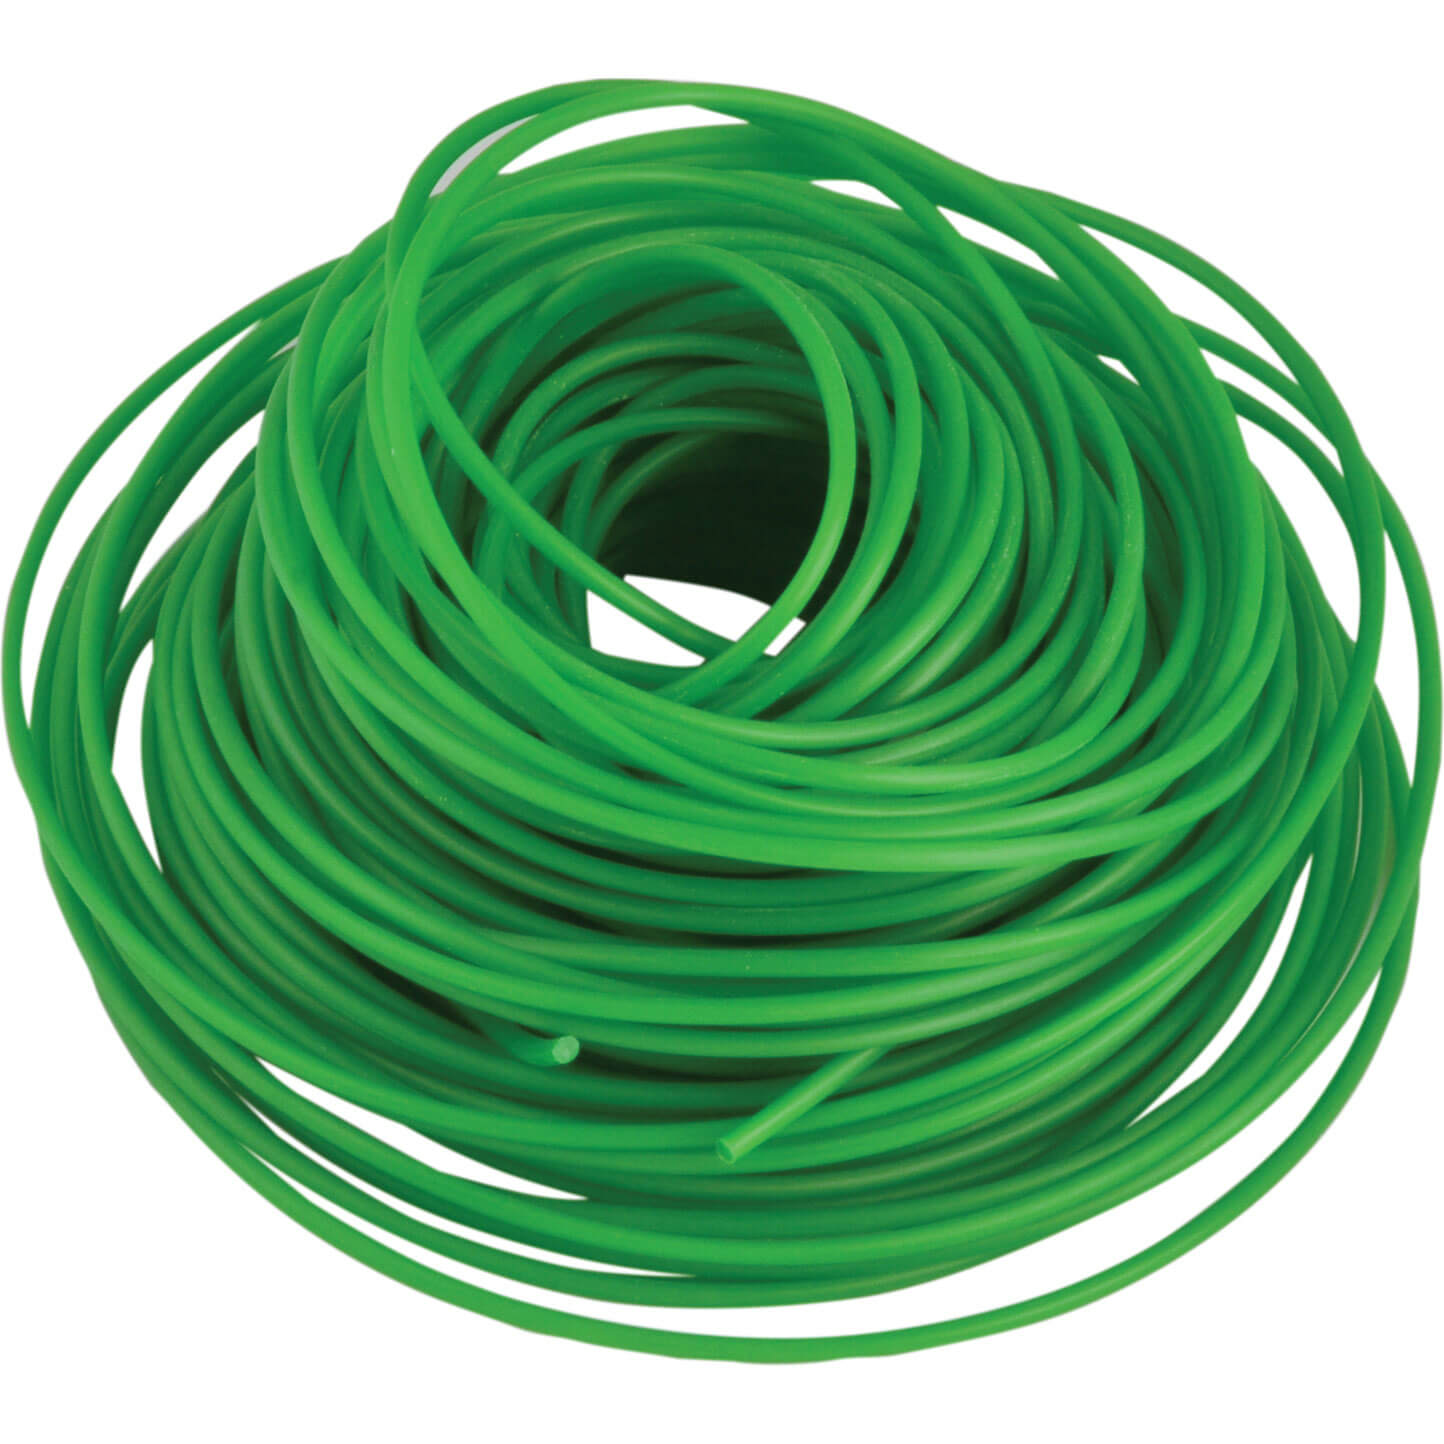 ALM Trimmer Line 2mm x 20m for Grass Trimmers Pack of 1